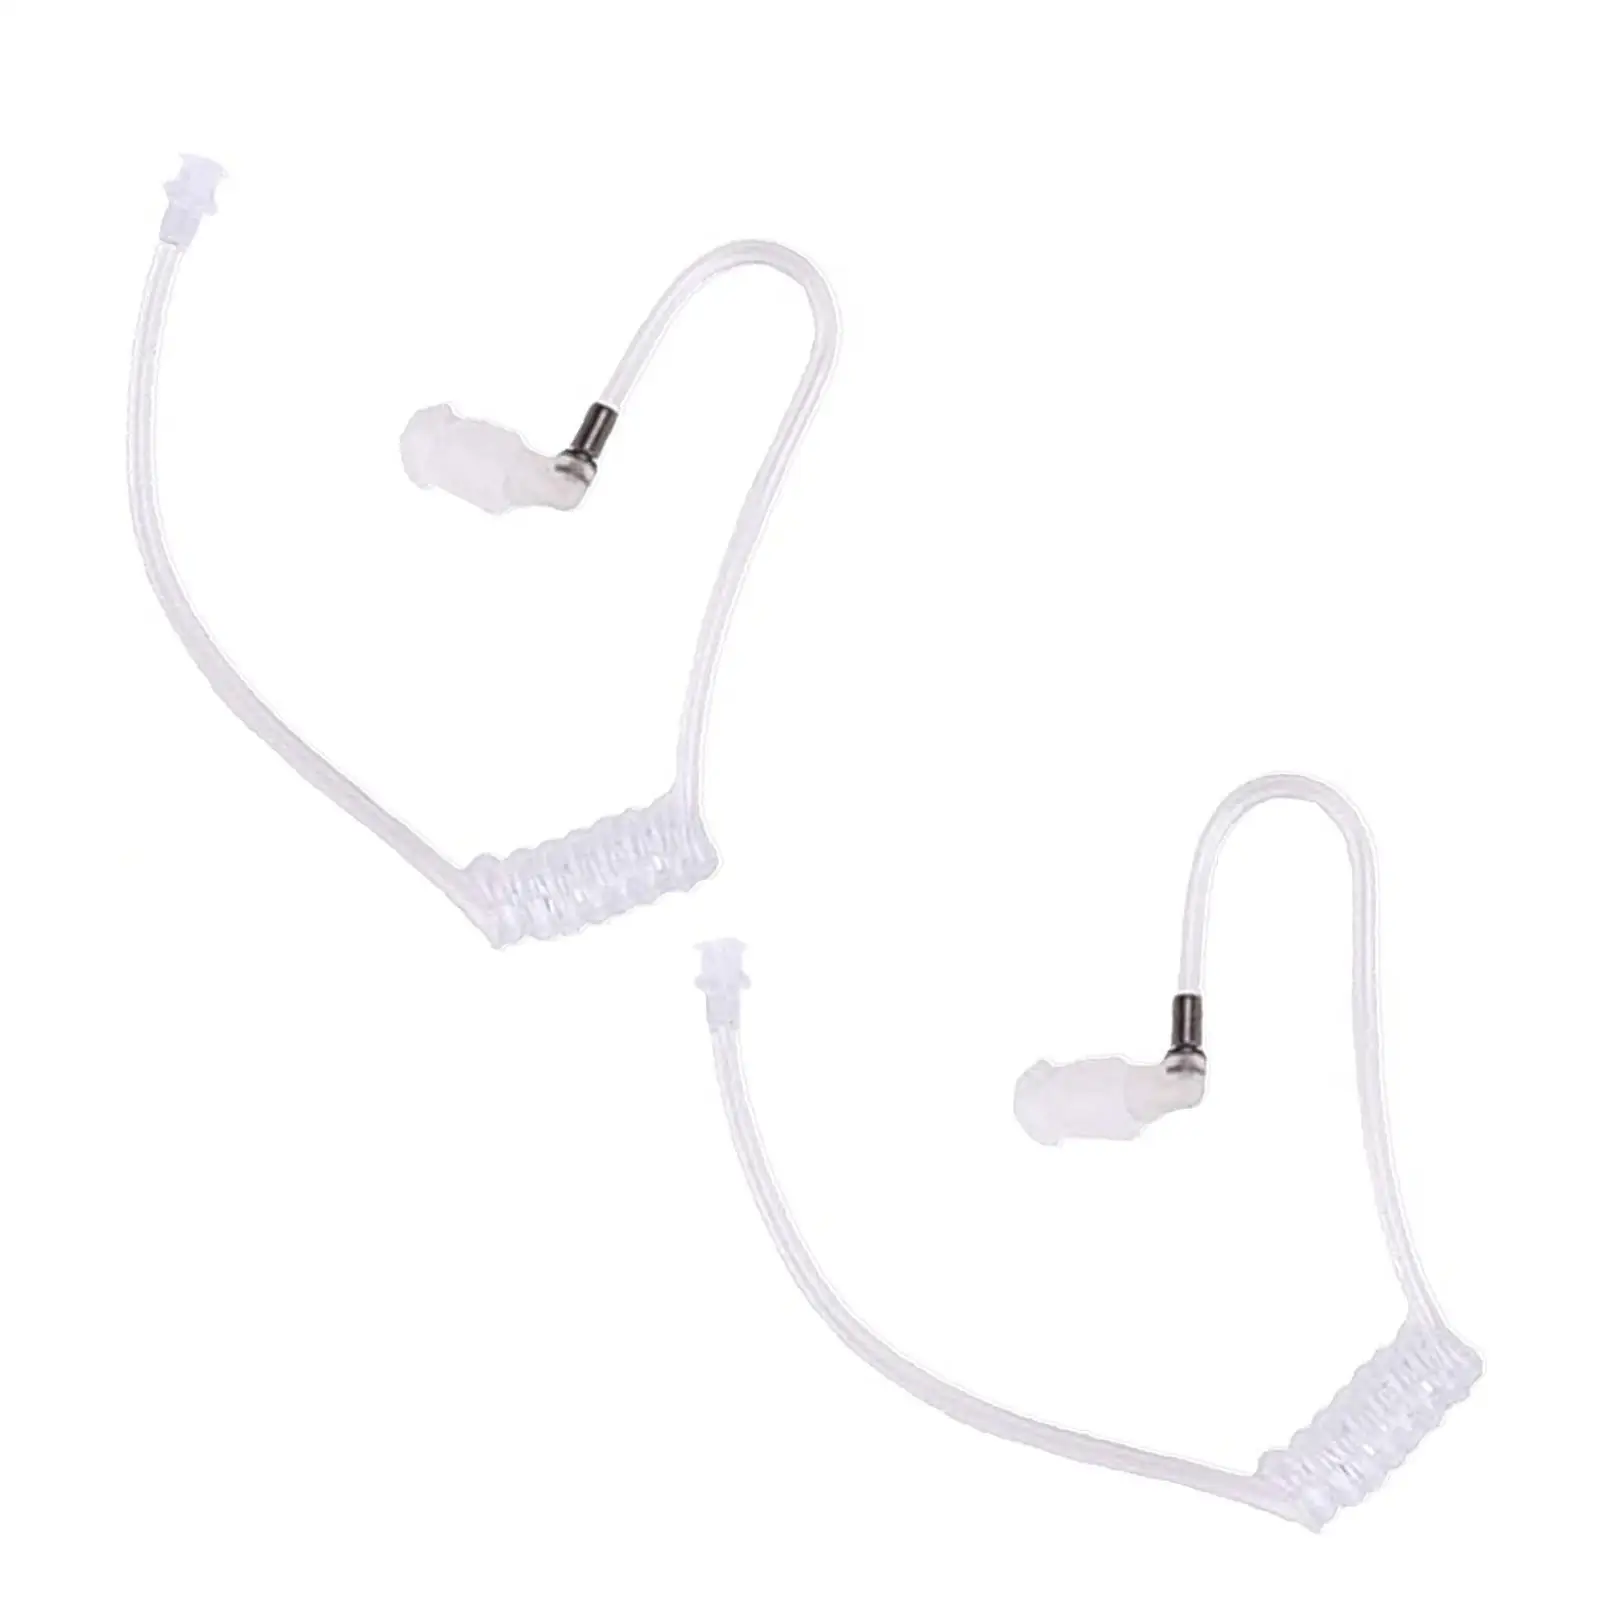 2x Replacement Acoustic Coil Tube Clear and White Easy to Be Replaced for Two Way Radio Intercom Earpiece Air Duct Headphones